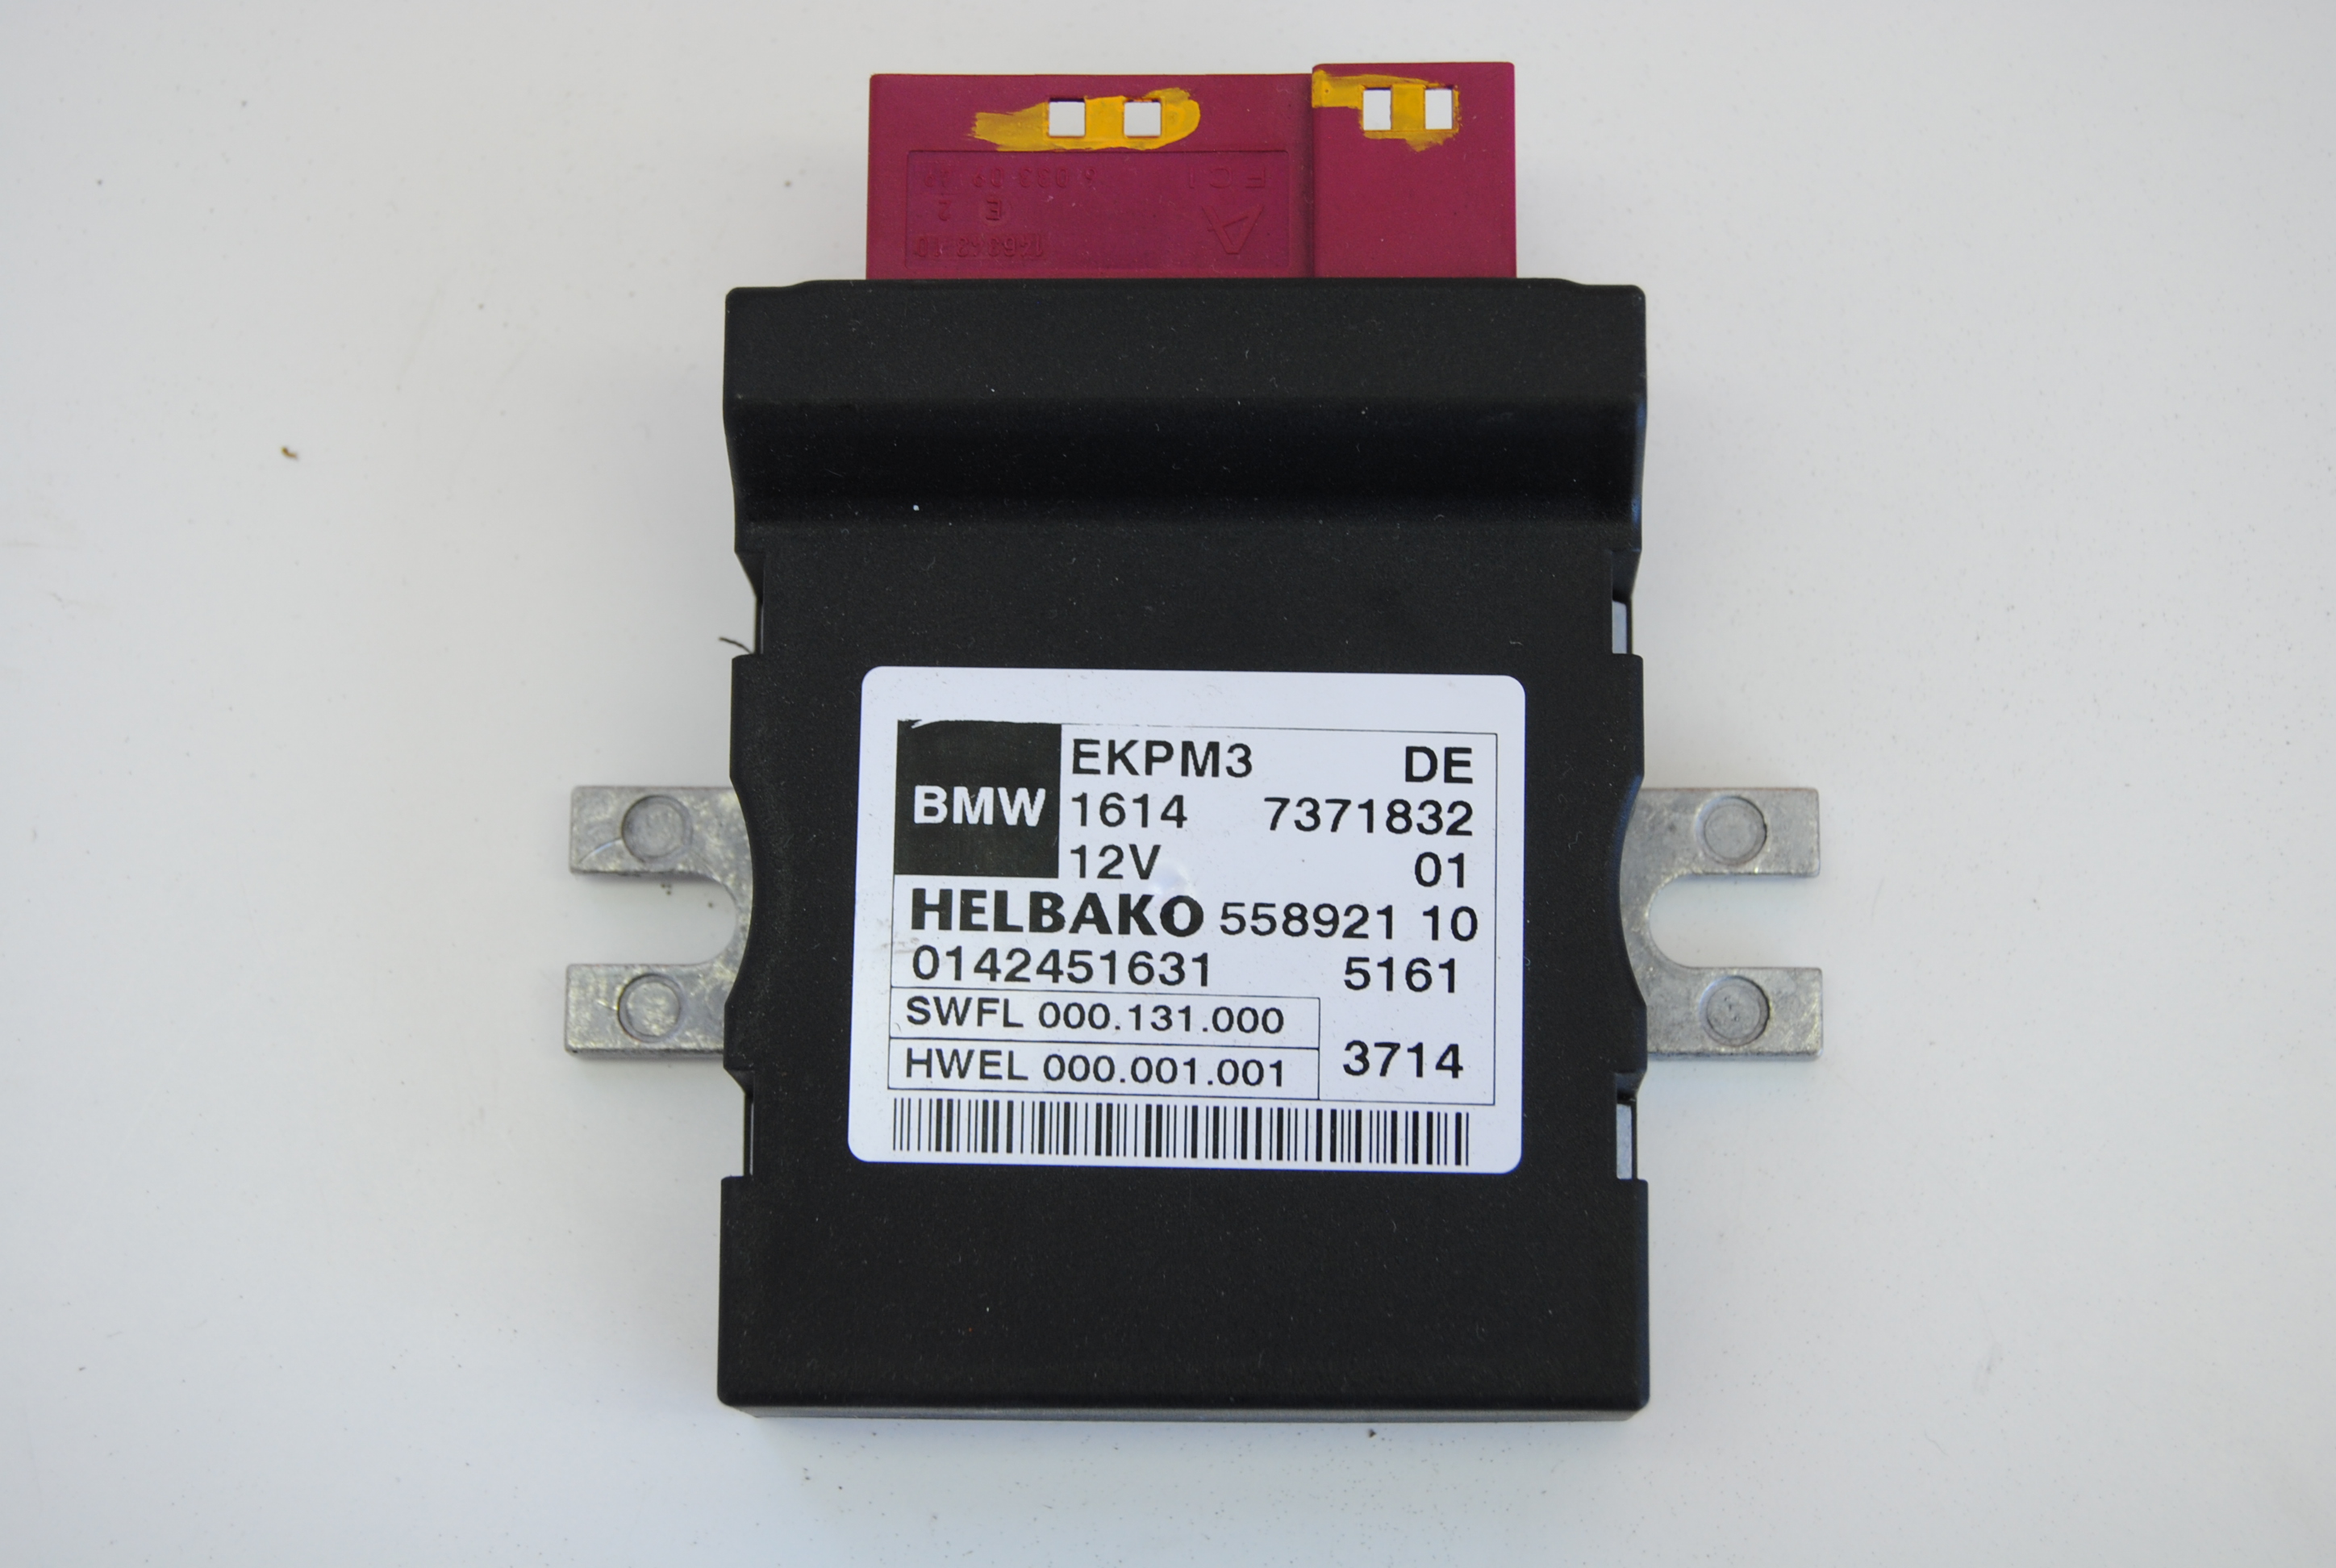 Bmw tv module part numbers #3